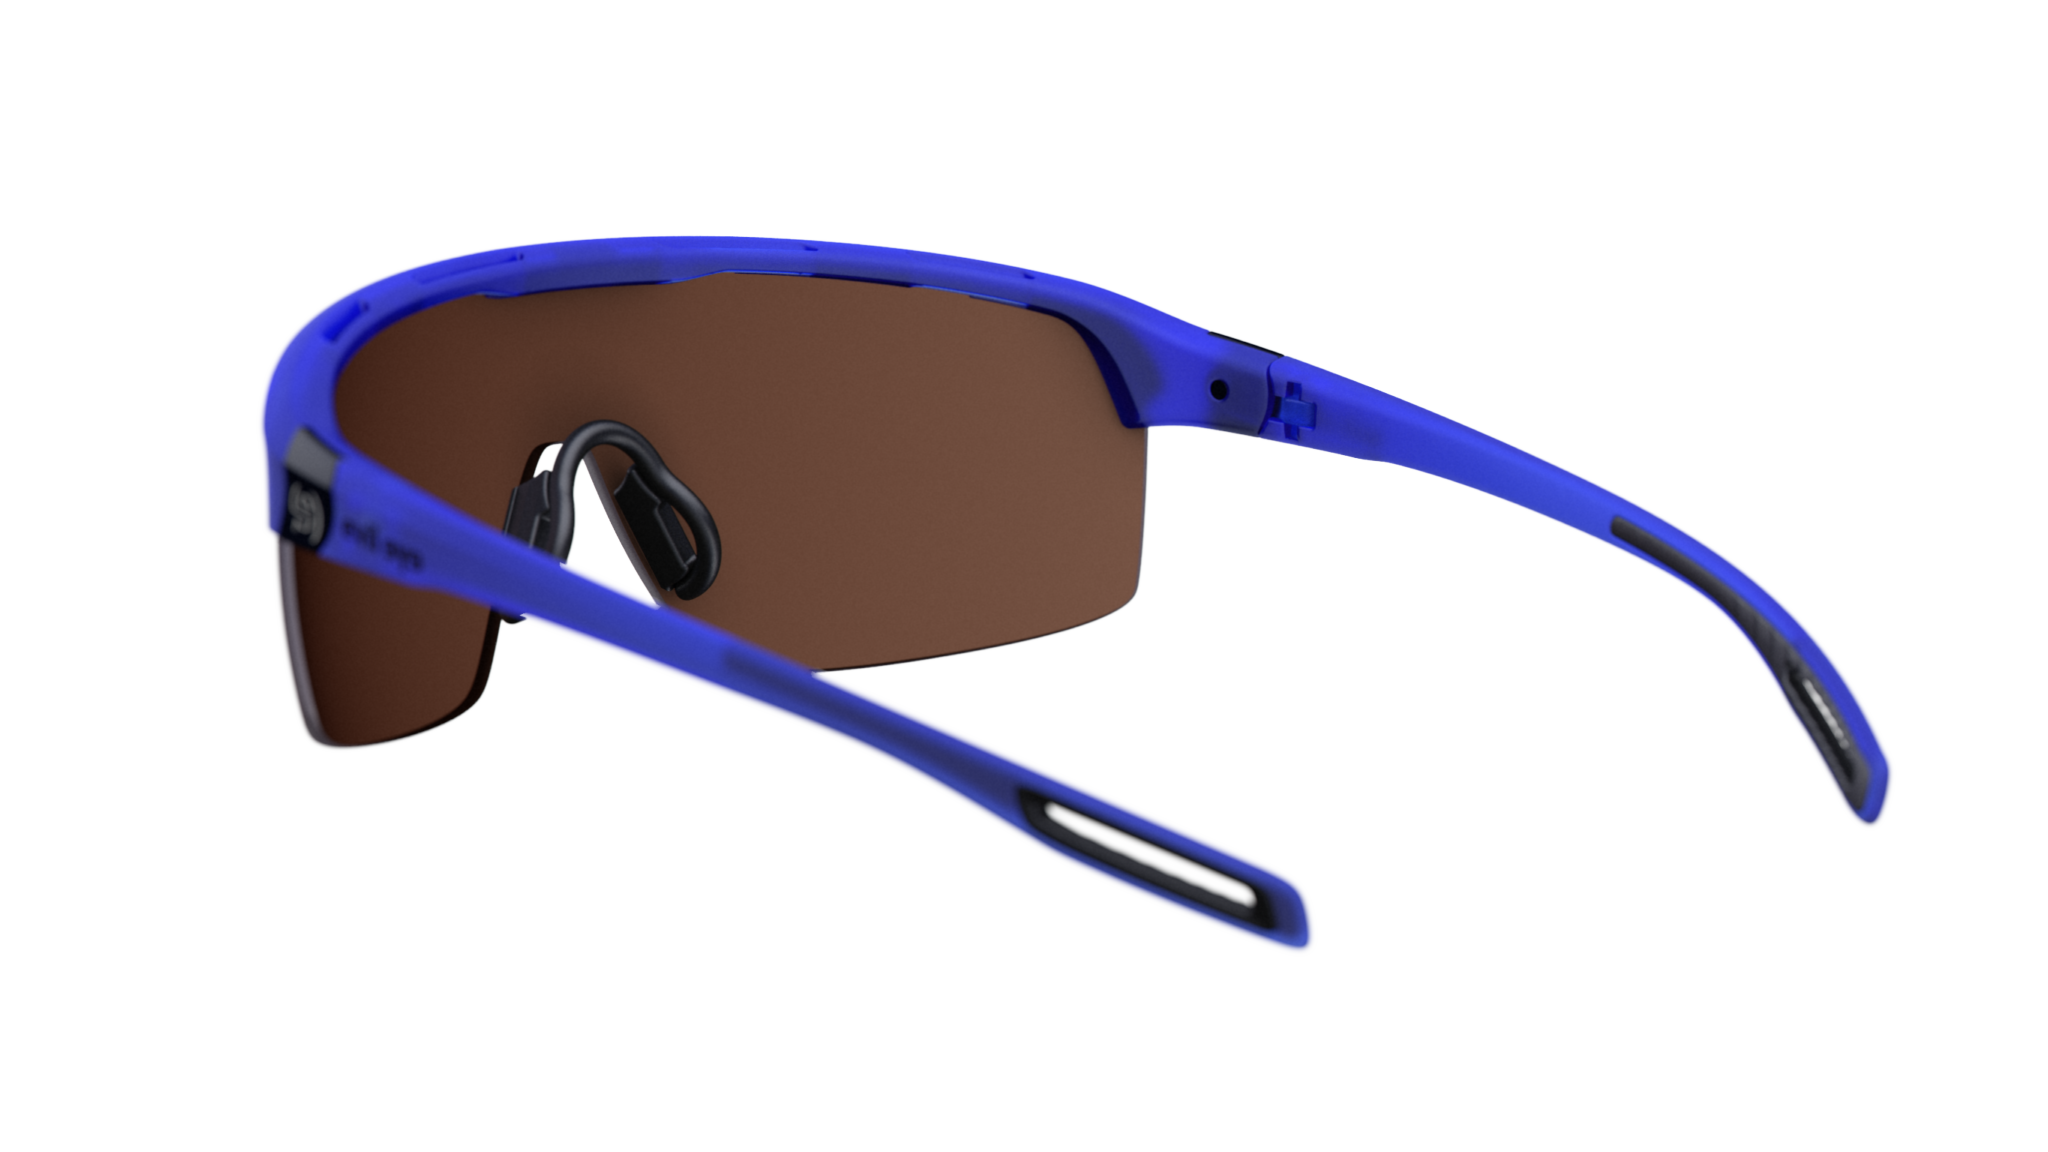 purchase traileye ng pro sports glasses online